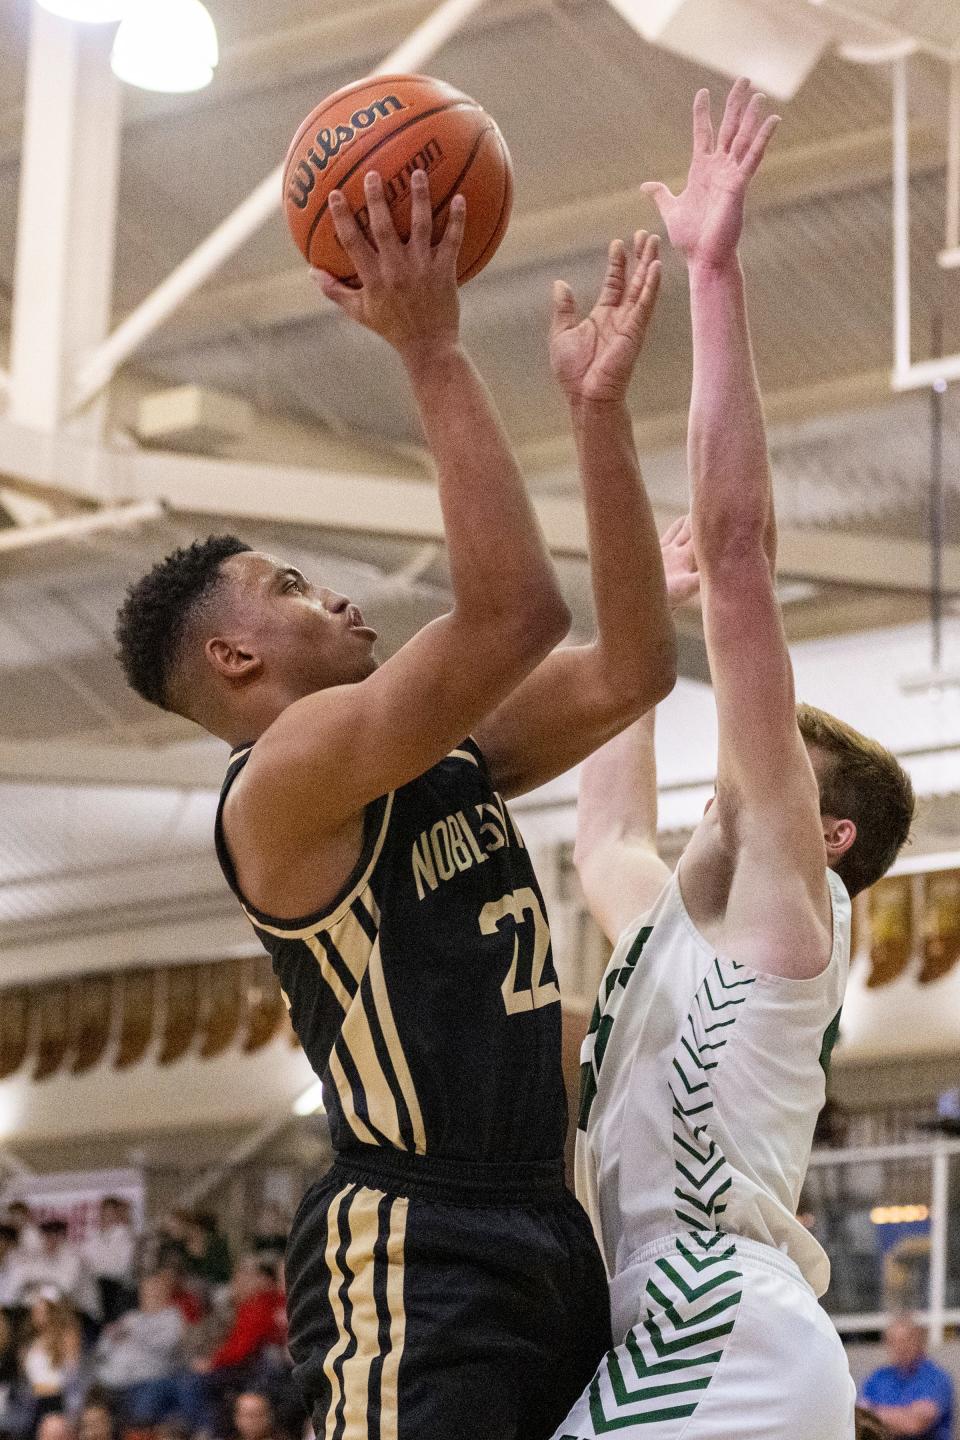 Noblesville High School sophomore Aiden Brewer (22) shoots during the first half of an IHSAA Sectional basketball game against Westfield High School, Friday, March 3, 2023, at Carmel High School.